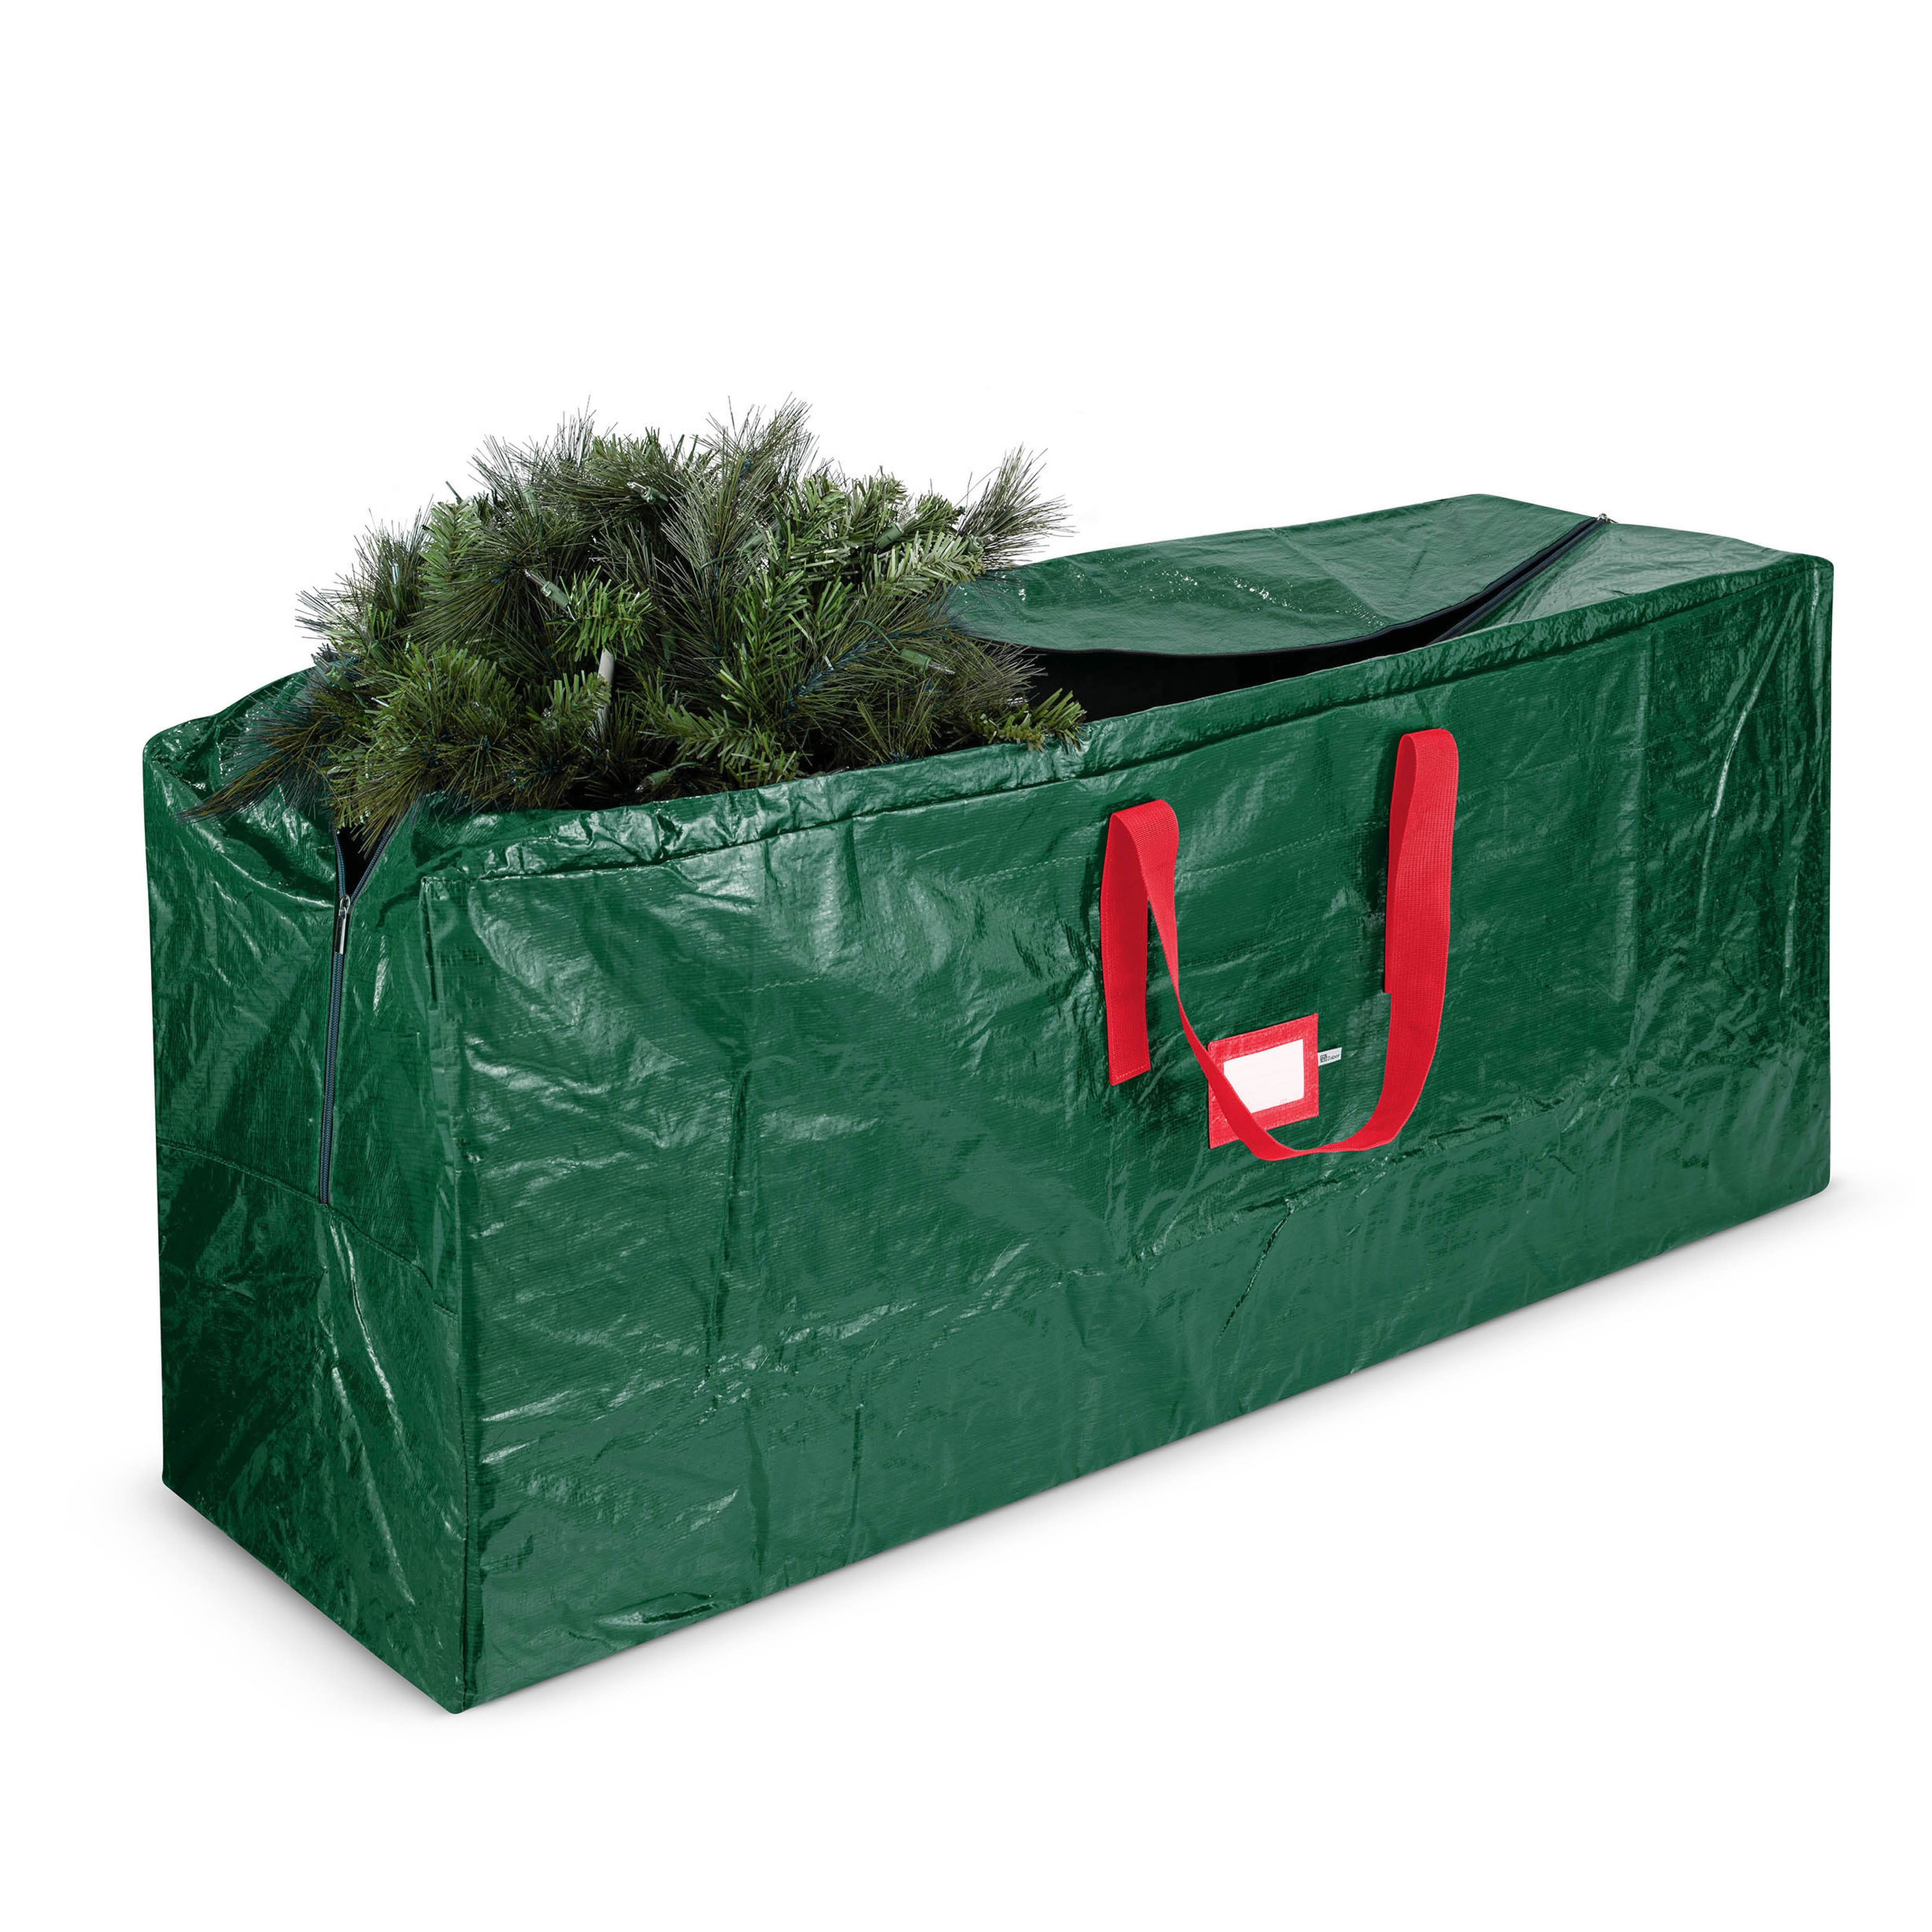 Heavy Duty Waterproof Holiday Tree Storage Bag Wreath Christmas Tree Decoration Accessories Storage Bag Tote Case to fit Artificial Trees Up to 59 Inch HFM09-C Hersent